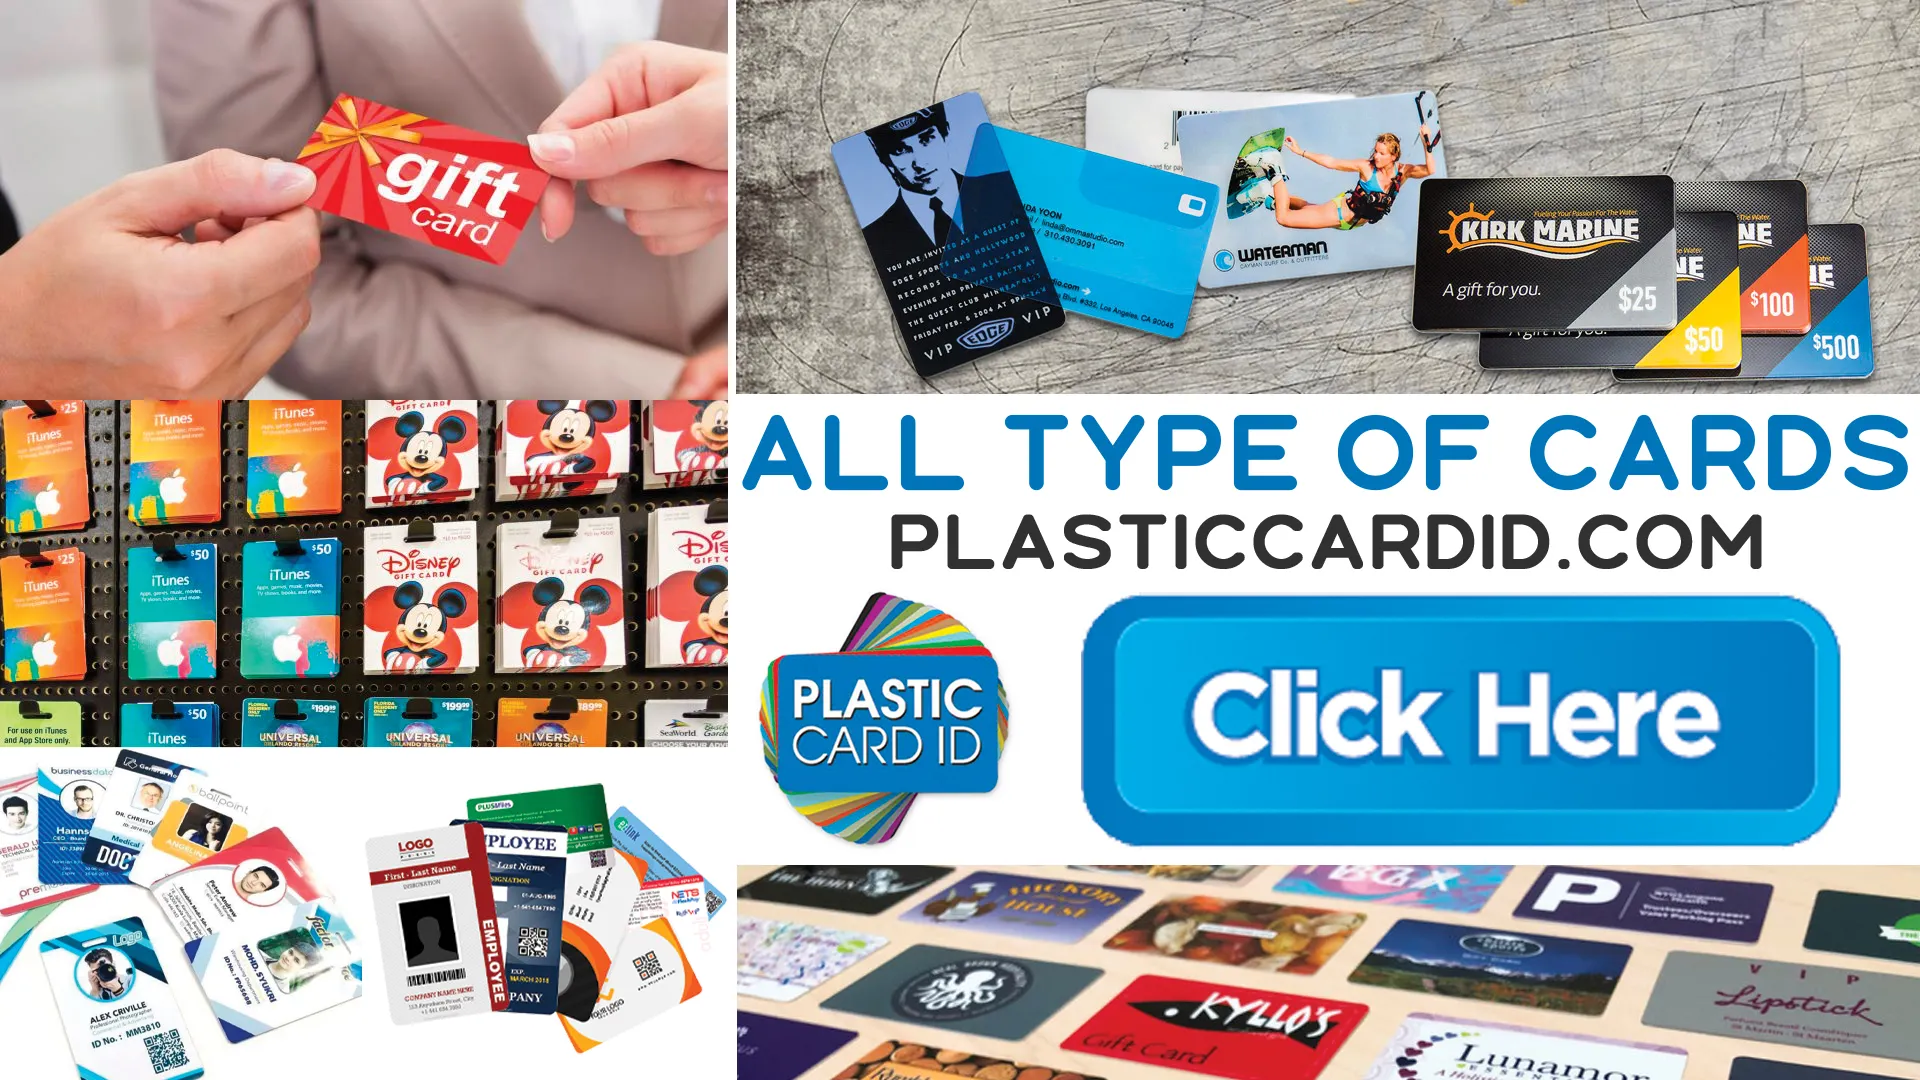 Welcome to Plastic Card ID




: Your Partner in Long-Lasting, Wear-Resistent Plastic Cards